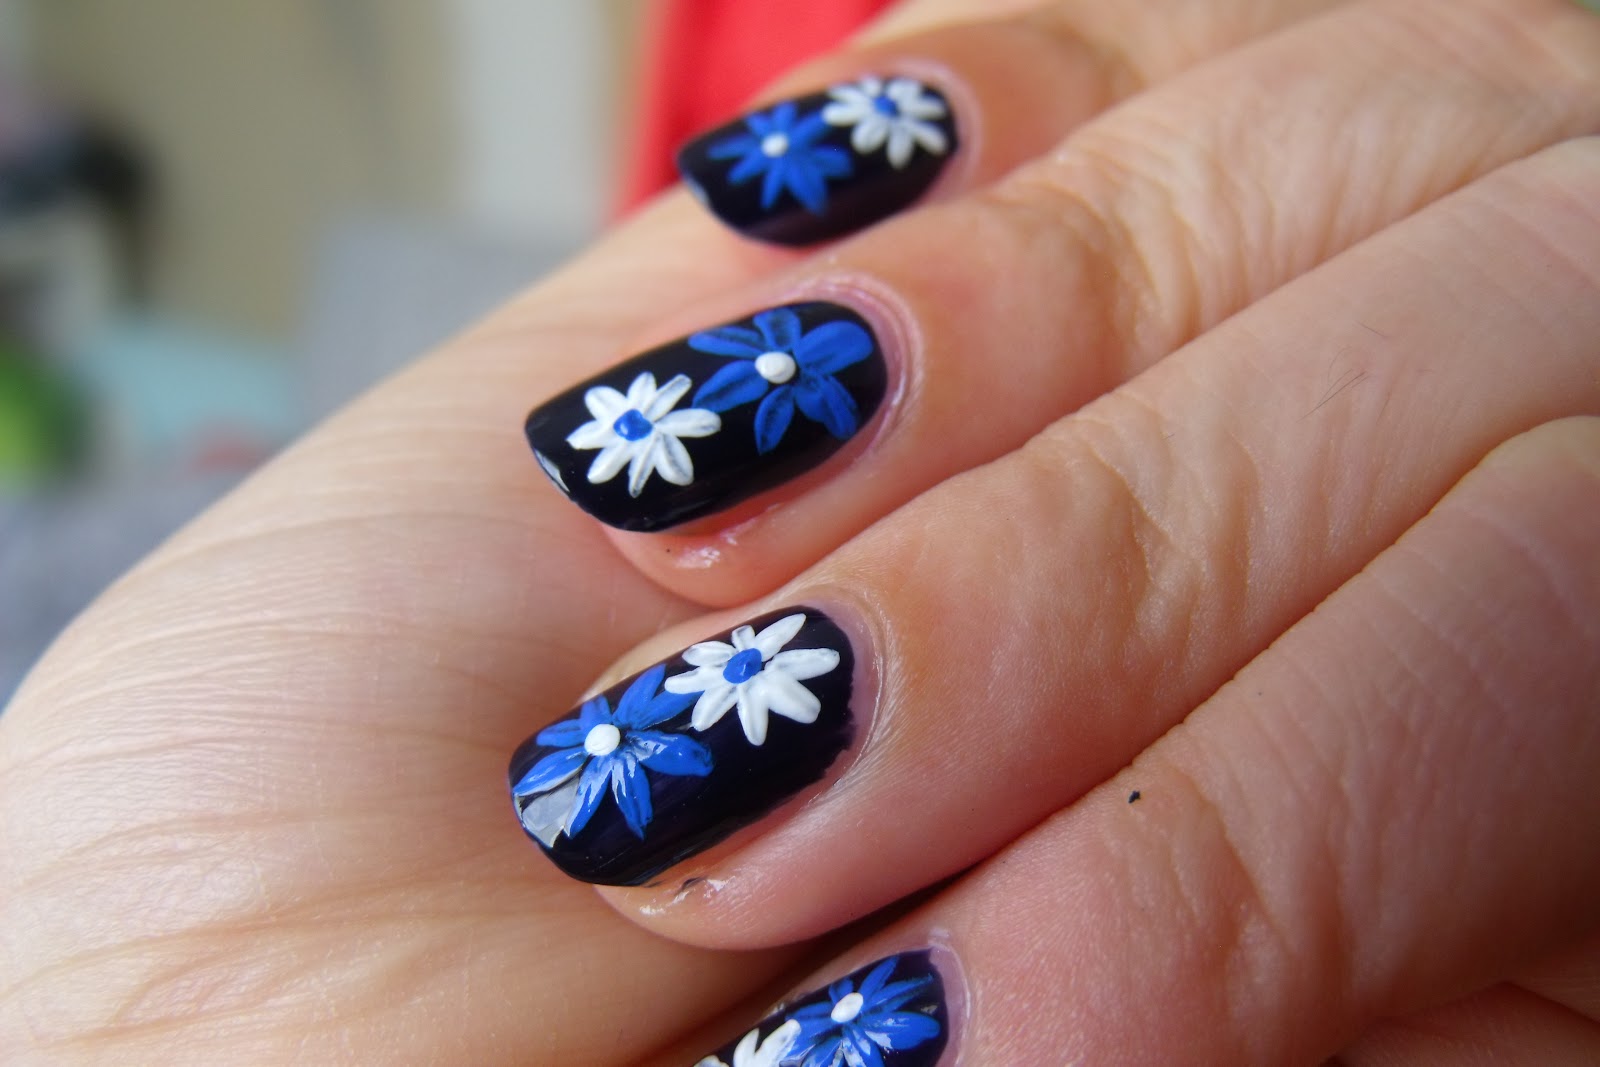 Nail Designs with Flowers - wide 8